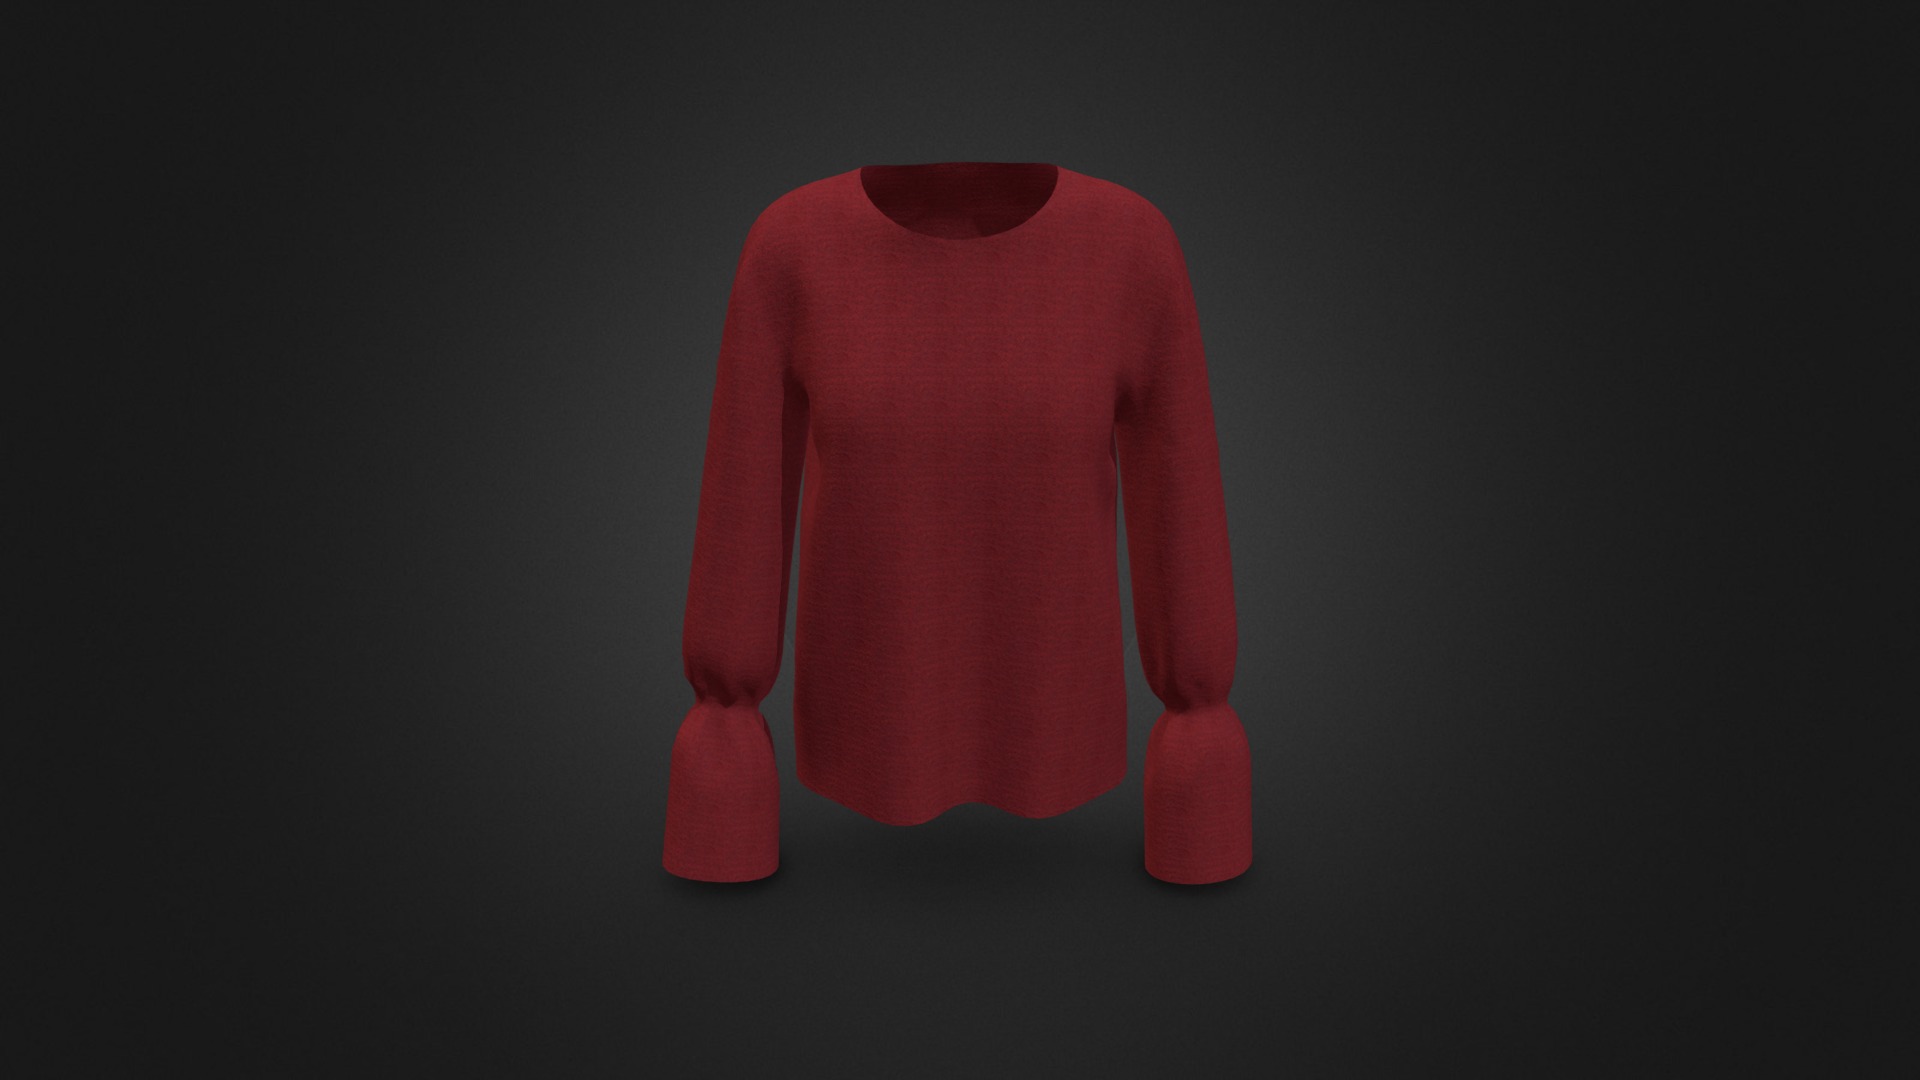 3D model Women wine t-shirts - This is a 3D model of the Women wine t-shirts. The 3D model is about a red jacket on a black background.